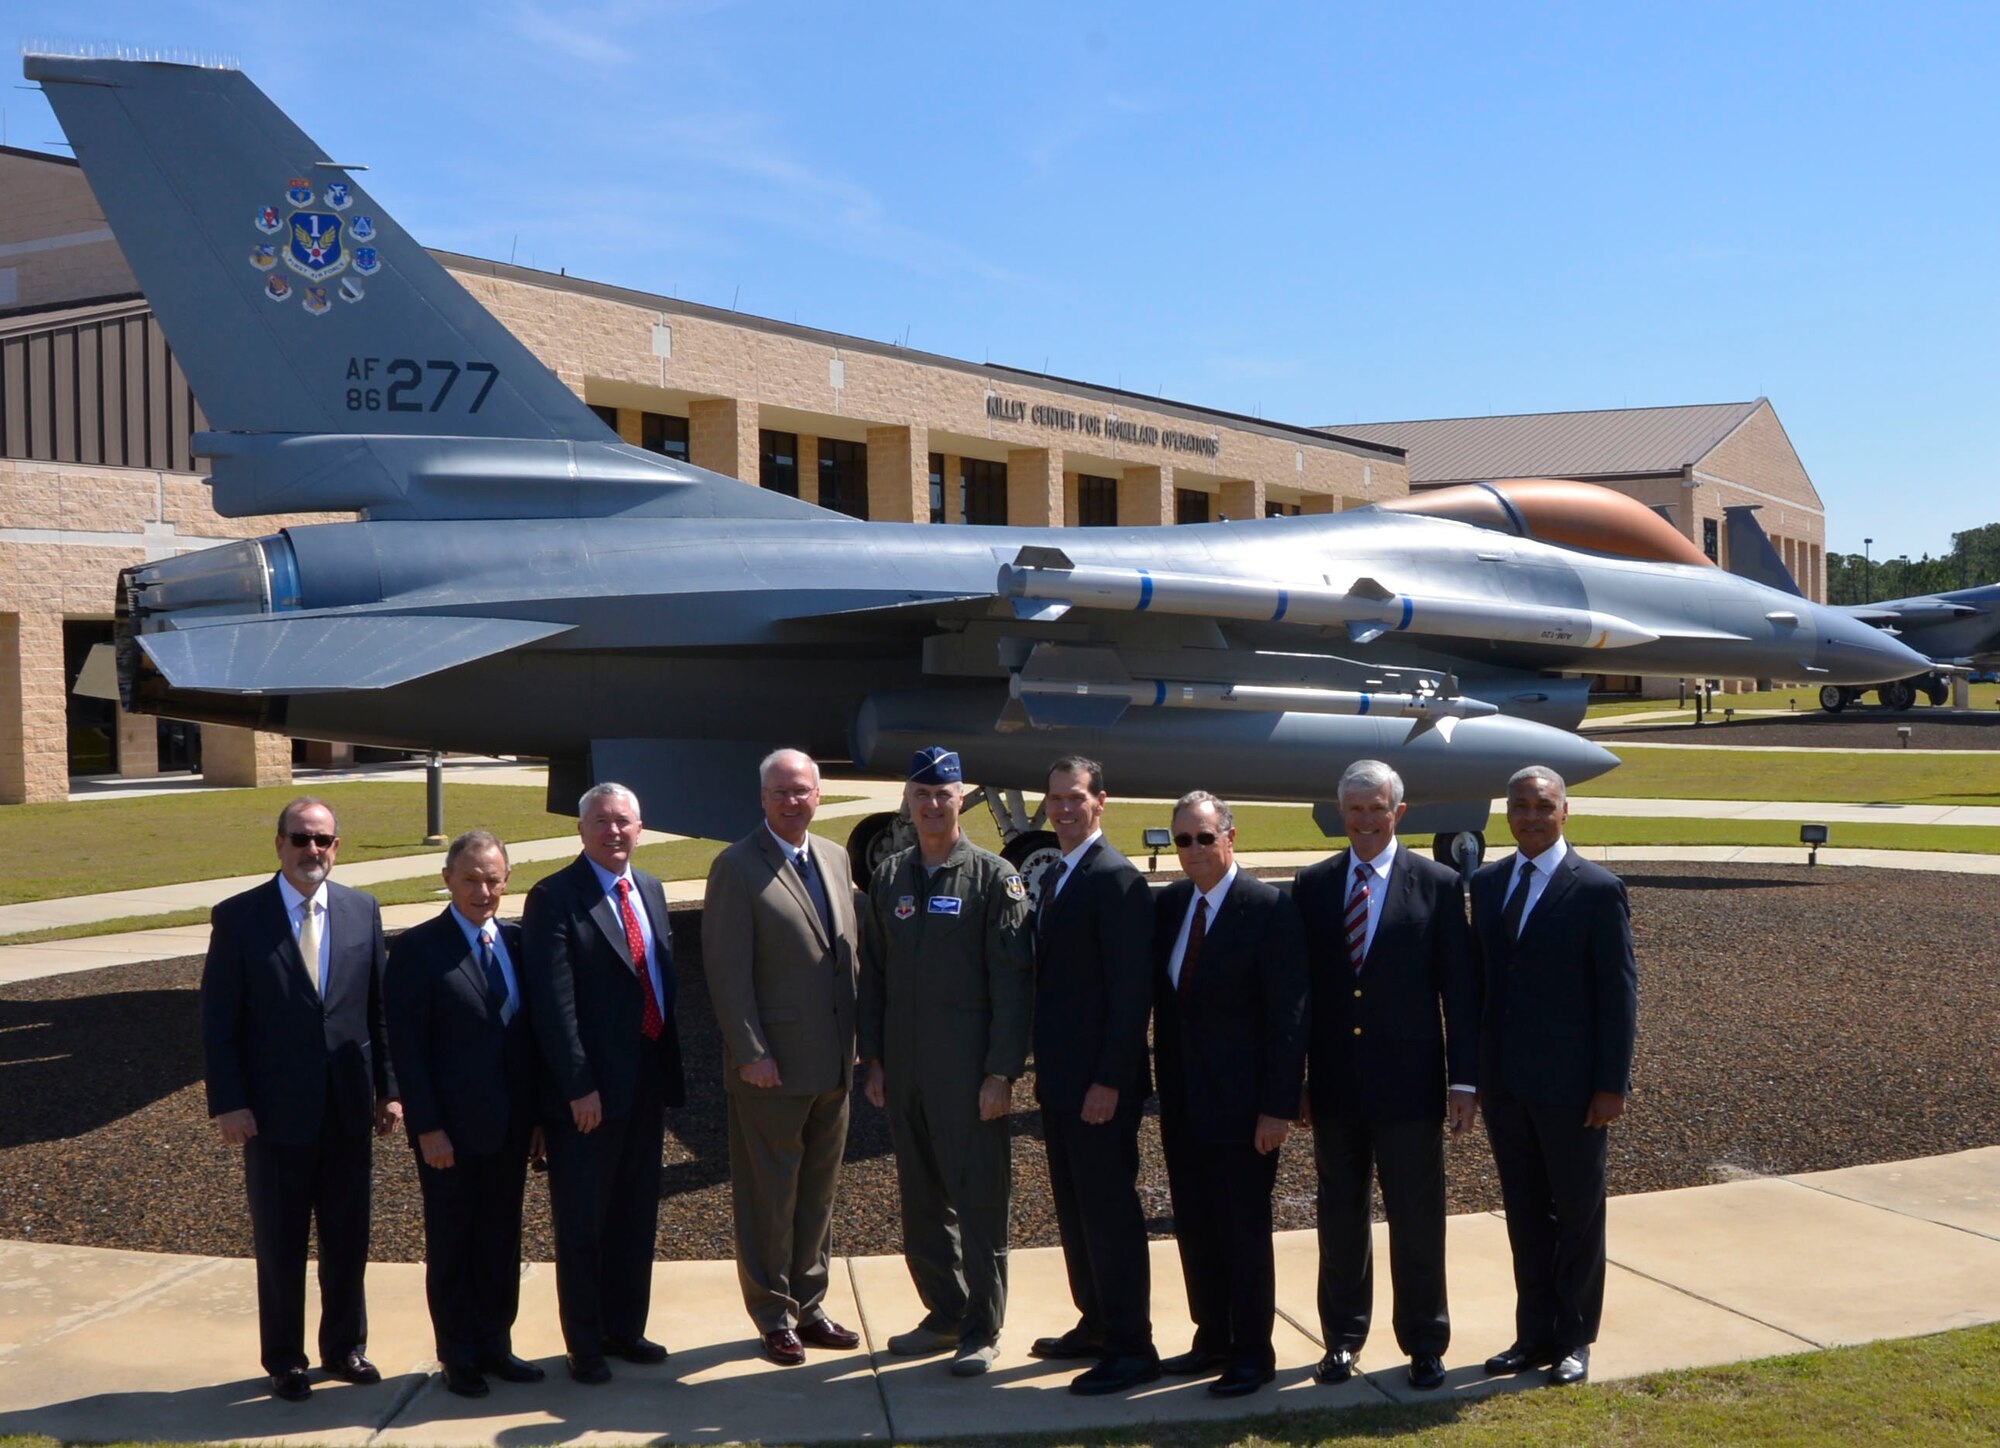 Eight former 1st Air Force commanders flank the current  1st AF Commander, Lt. Gen. R. Scott Williams, for a photo opportunity with the 1st Air Force F-16 Fighting Falcon March 13. The leaders were here for the “Evolution of 1st Air Force Commander’s Forum,” held March 13-14, which brought together eight previous 1st Air Force commanders, from 1994 to the present, for a discussion on how their previous command experience lessons could enhance the success of both current and future enterprise operations.  (Air Force Photo by Mary McHale)